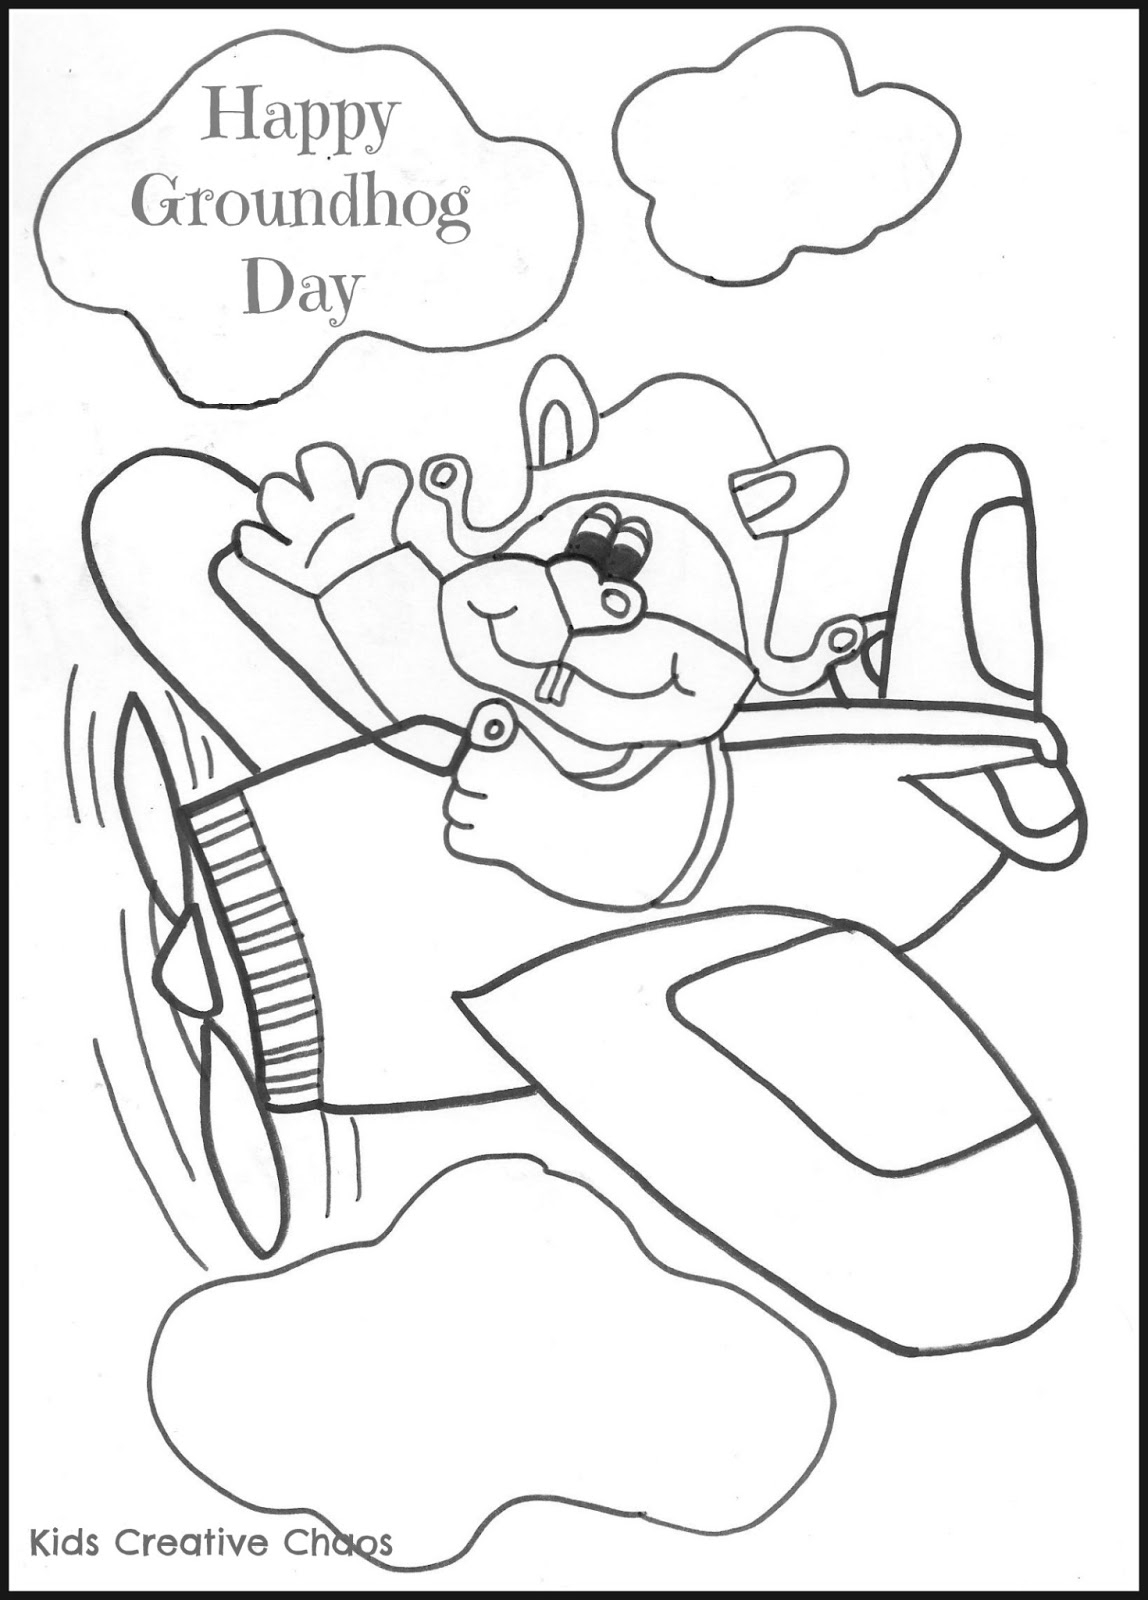 Groundhog Day Printable Coloring Pages Groundhog Day Coloring Pages At Getdrawings Free For Personal